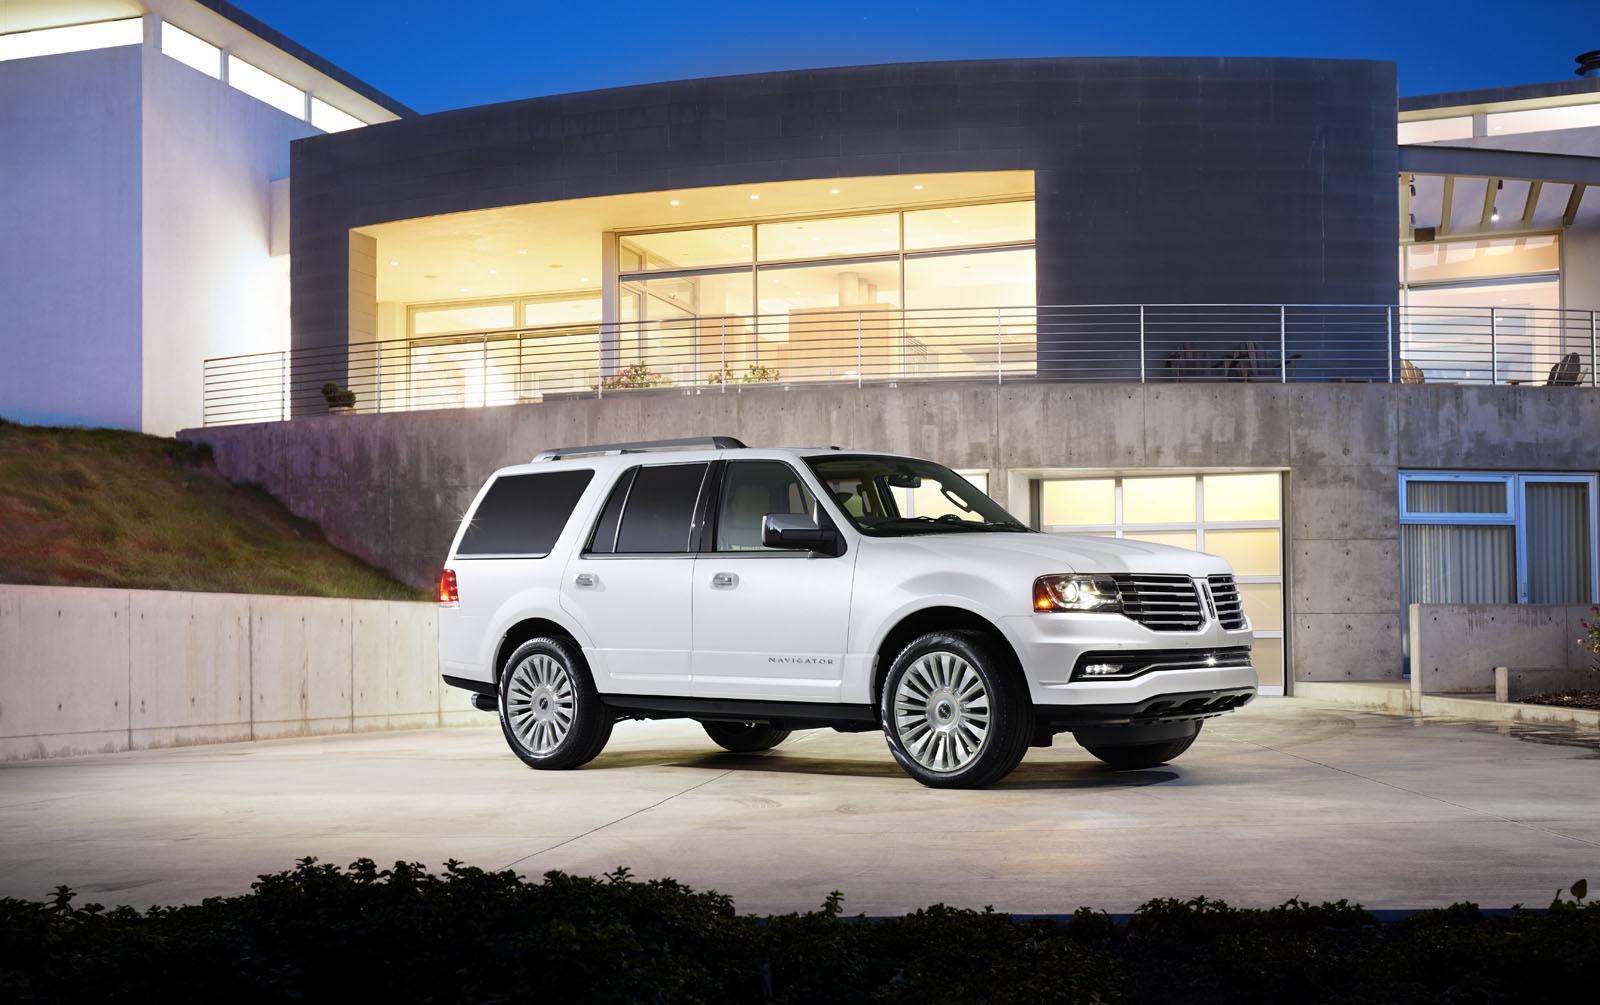 Lincoln Navigator Background And Wallpaper Car